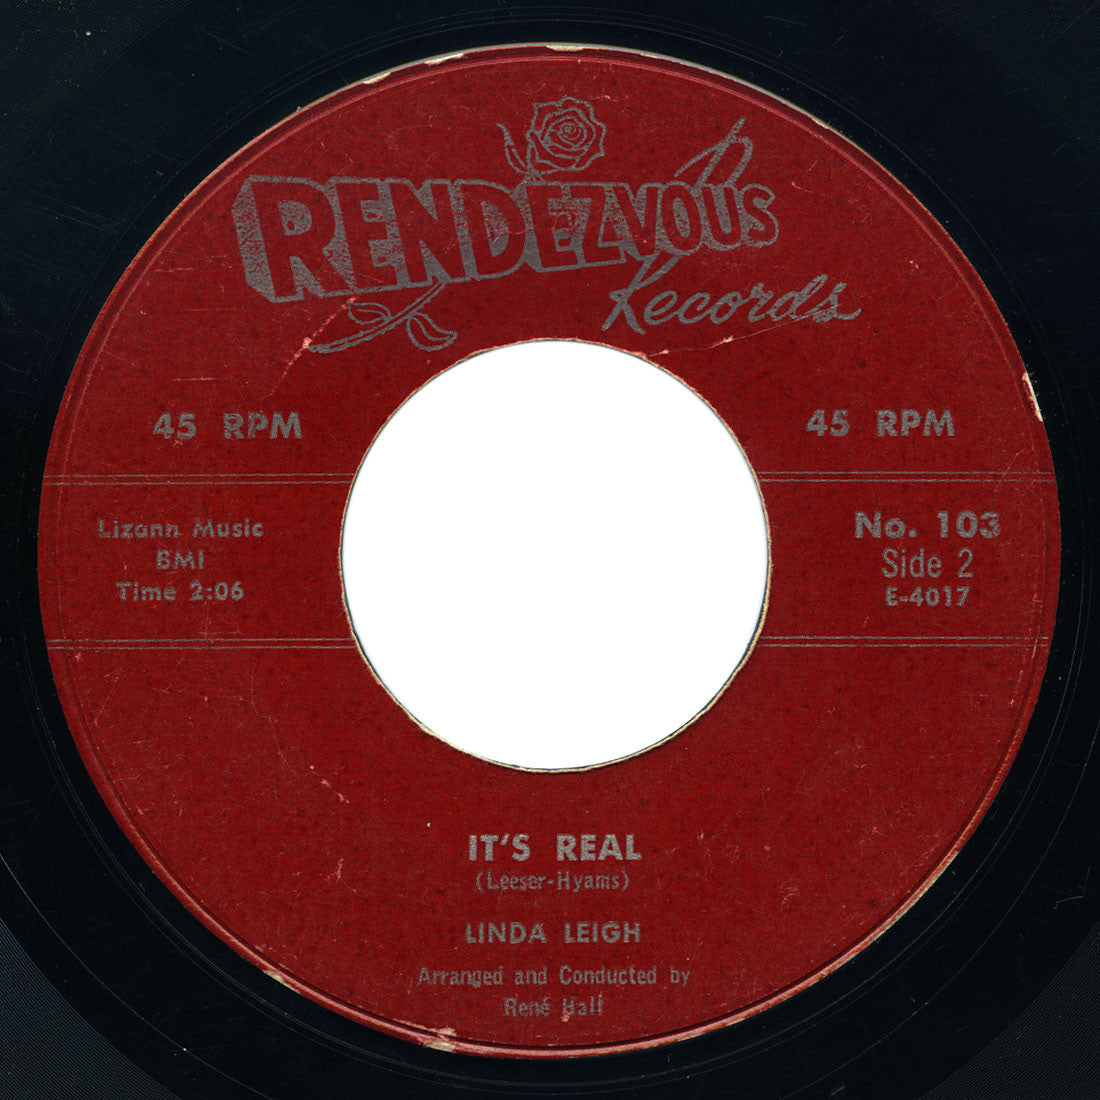 Linda Leigh - Move Out / It’s Real - Rendezvous